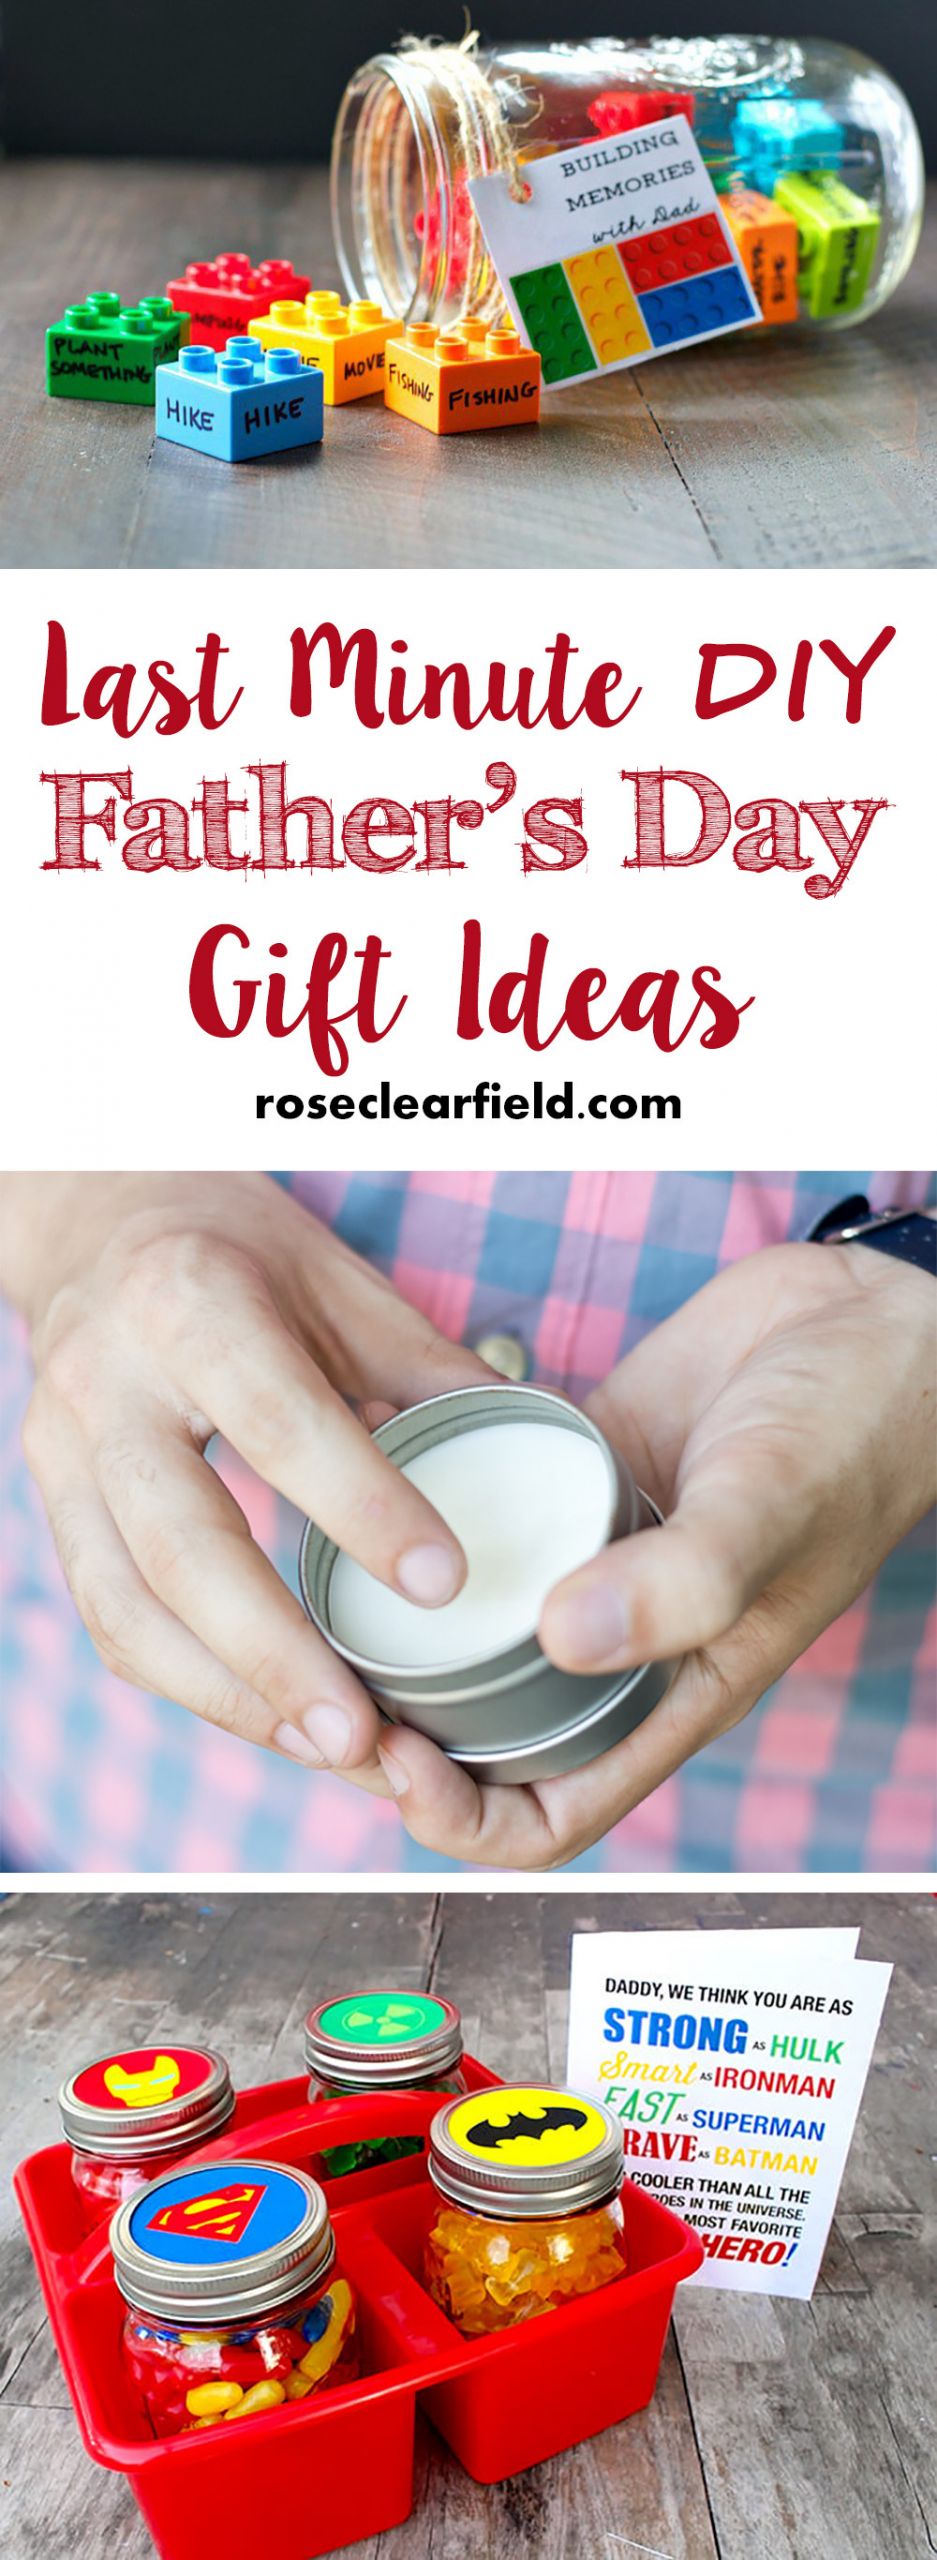 DIY Gifts For Fathers Day
 Last Minute DIY Father s Day Gift Ideas • Rose Clearfield